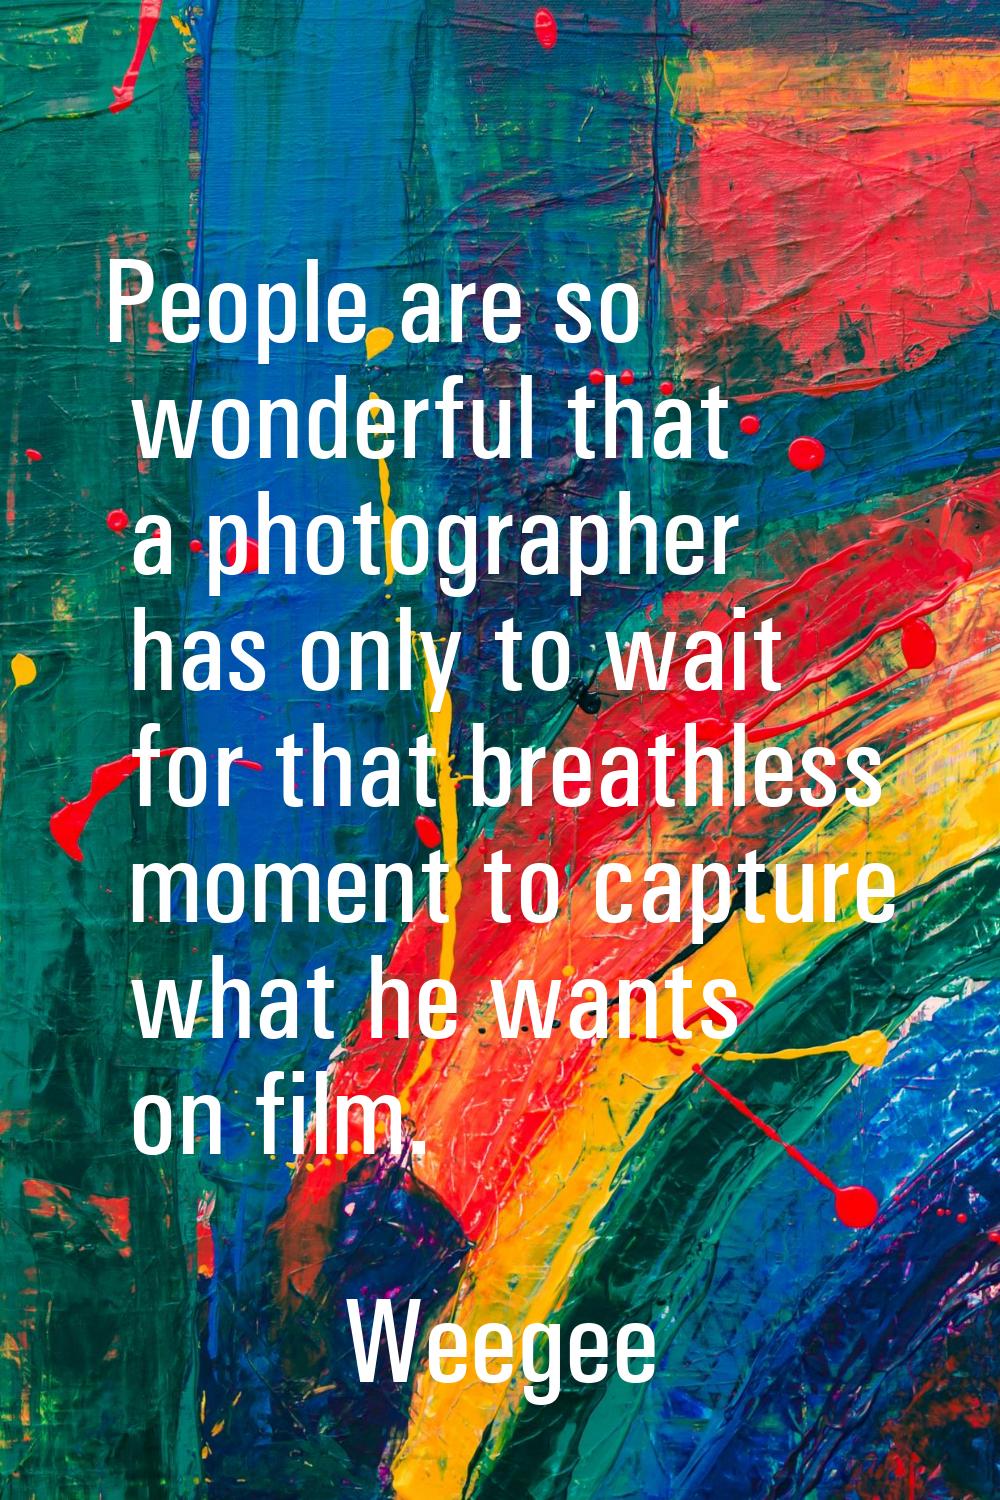 People are so wonderful that a photographer has only to wait for that breathless moment to capture 